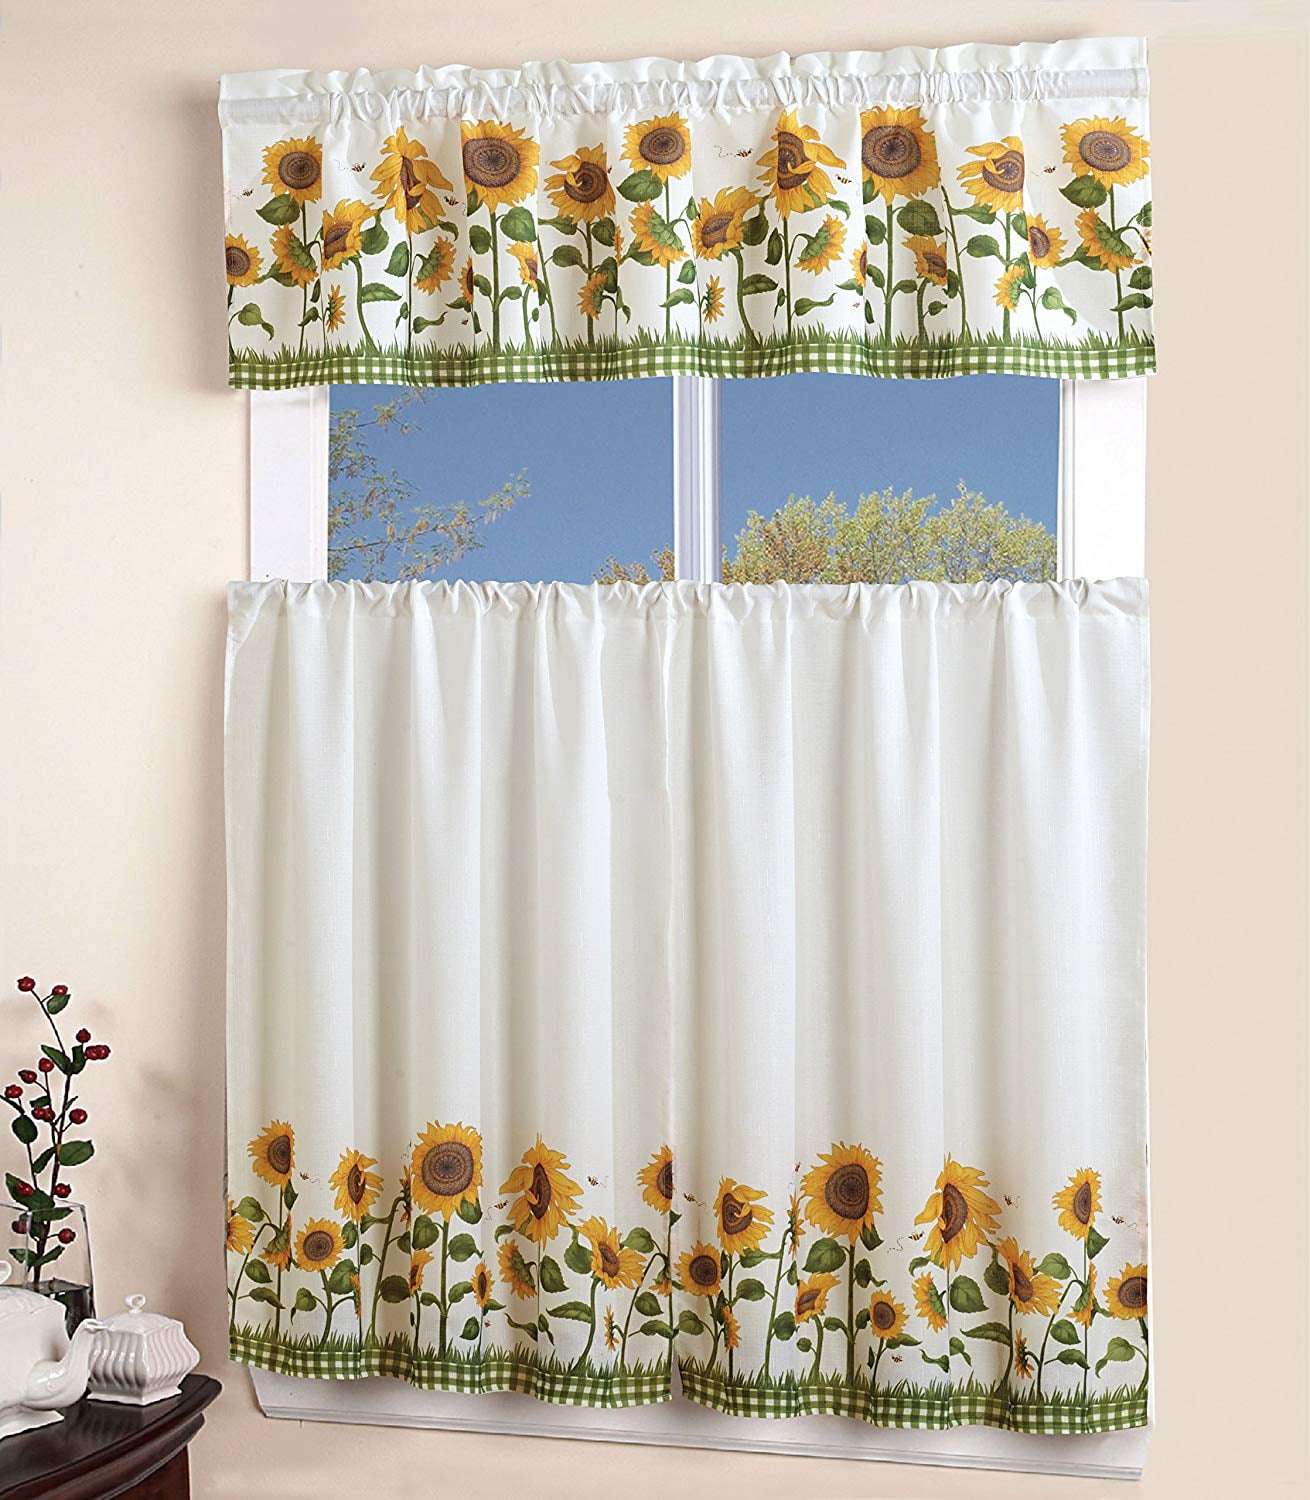 MarCielo 3 Piece Printed Floral Kitchen/Cafe Curtain With Swag and Tier